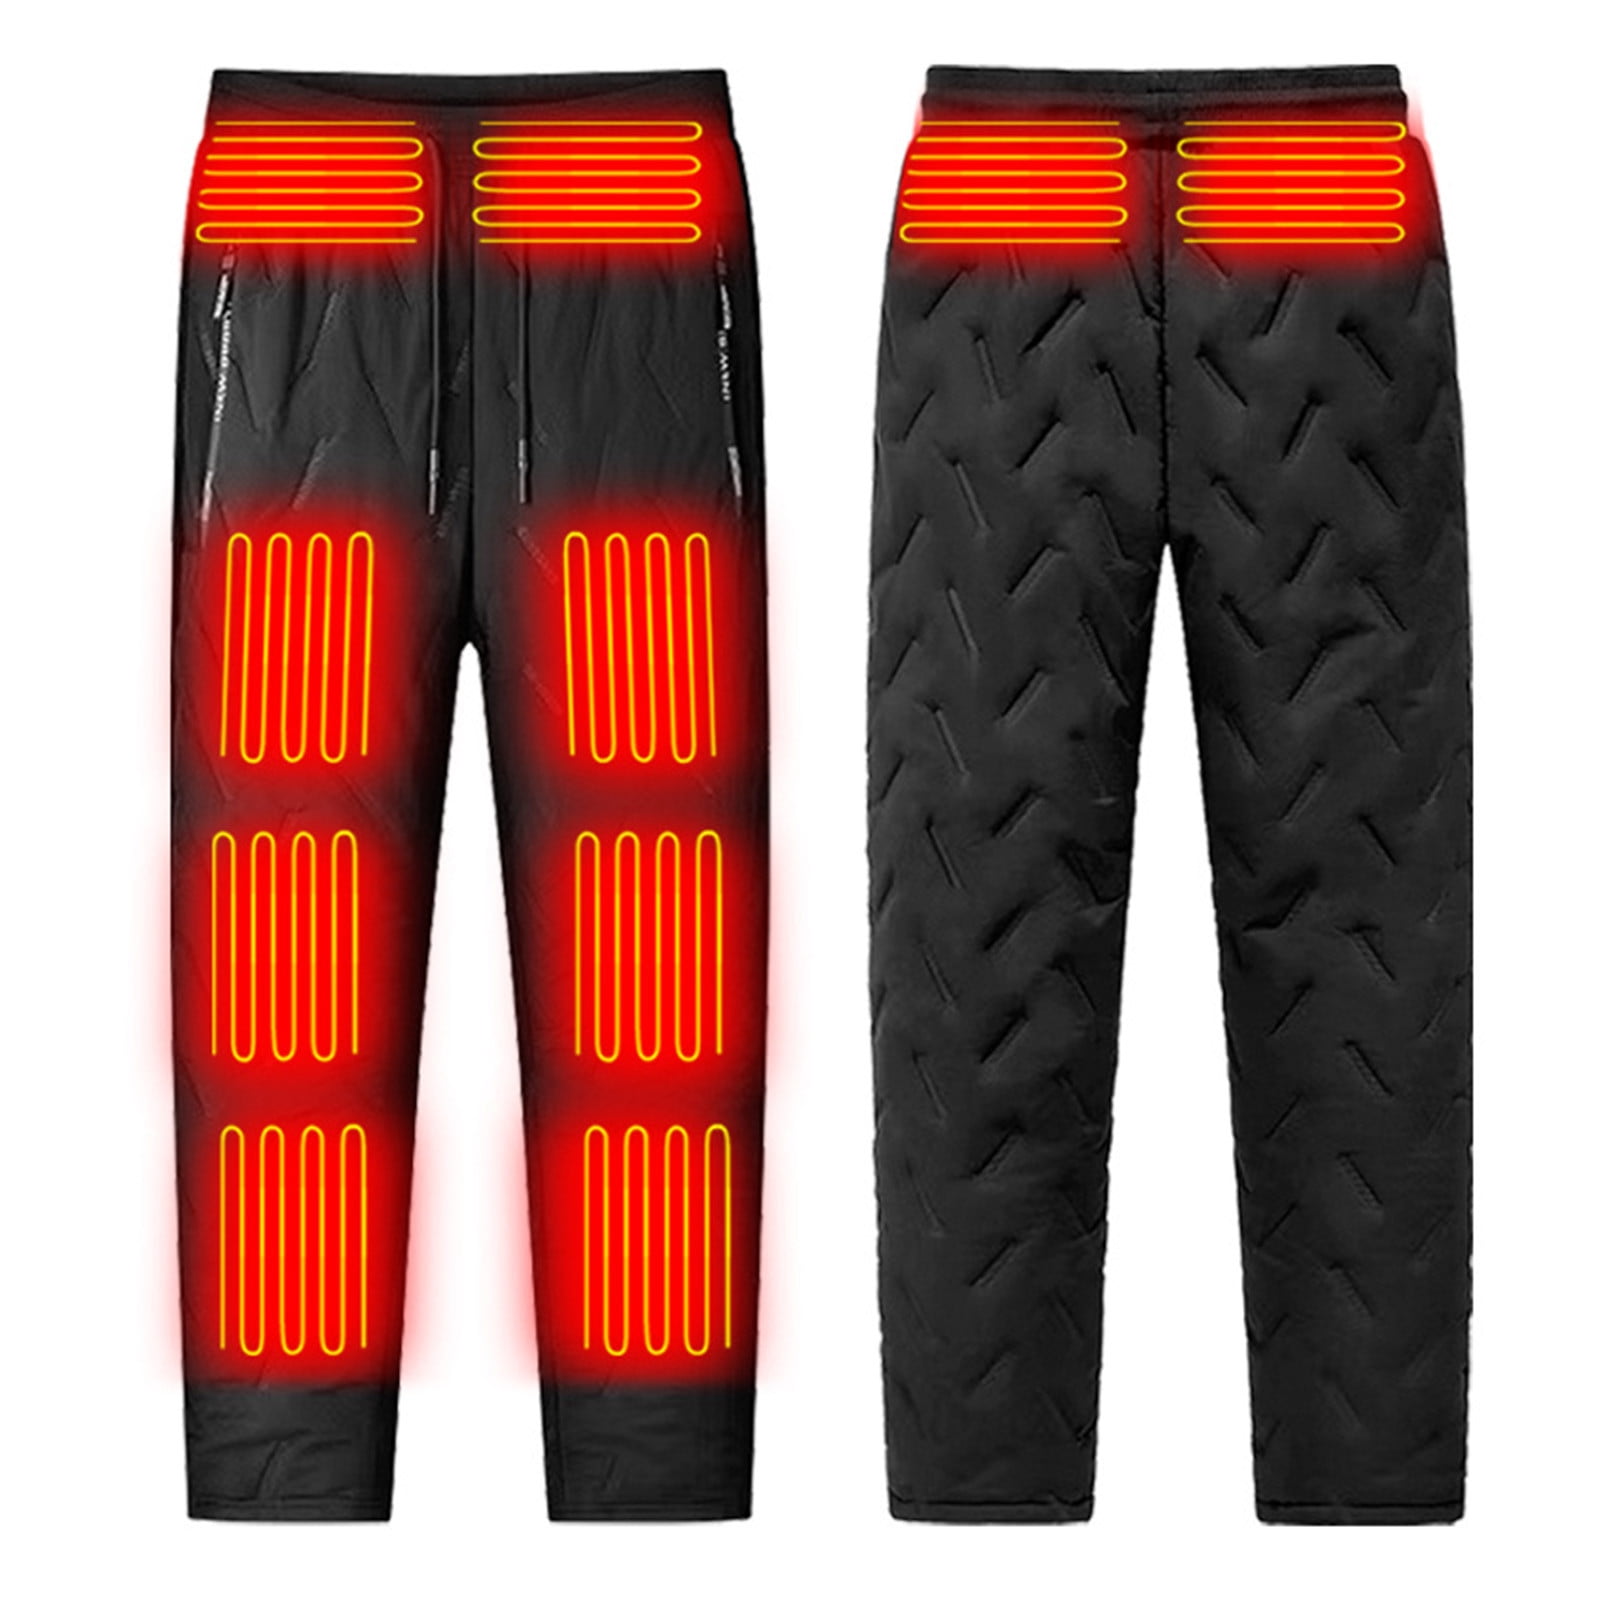 Unisex Bluetooth Heated Pants with Battery Pack Included - App